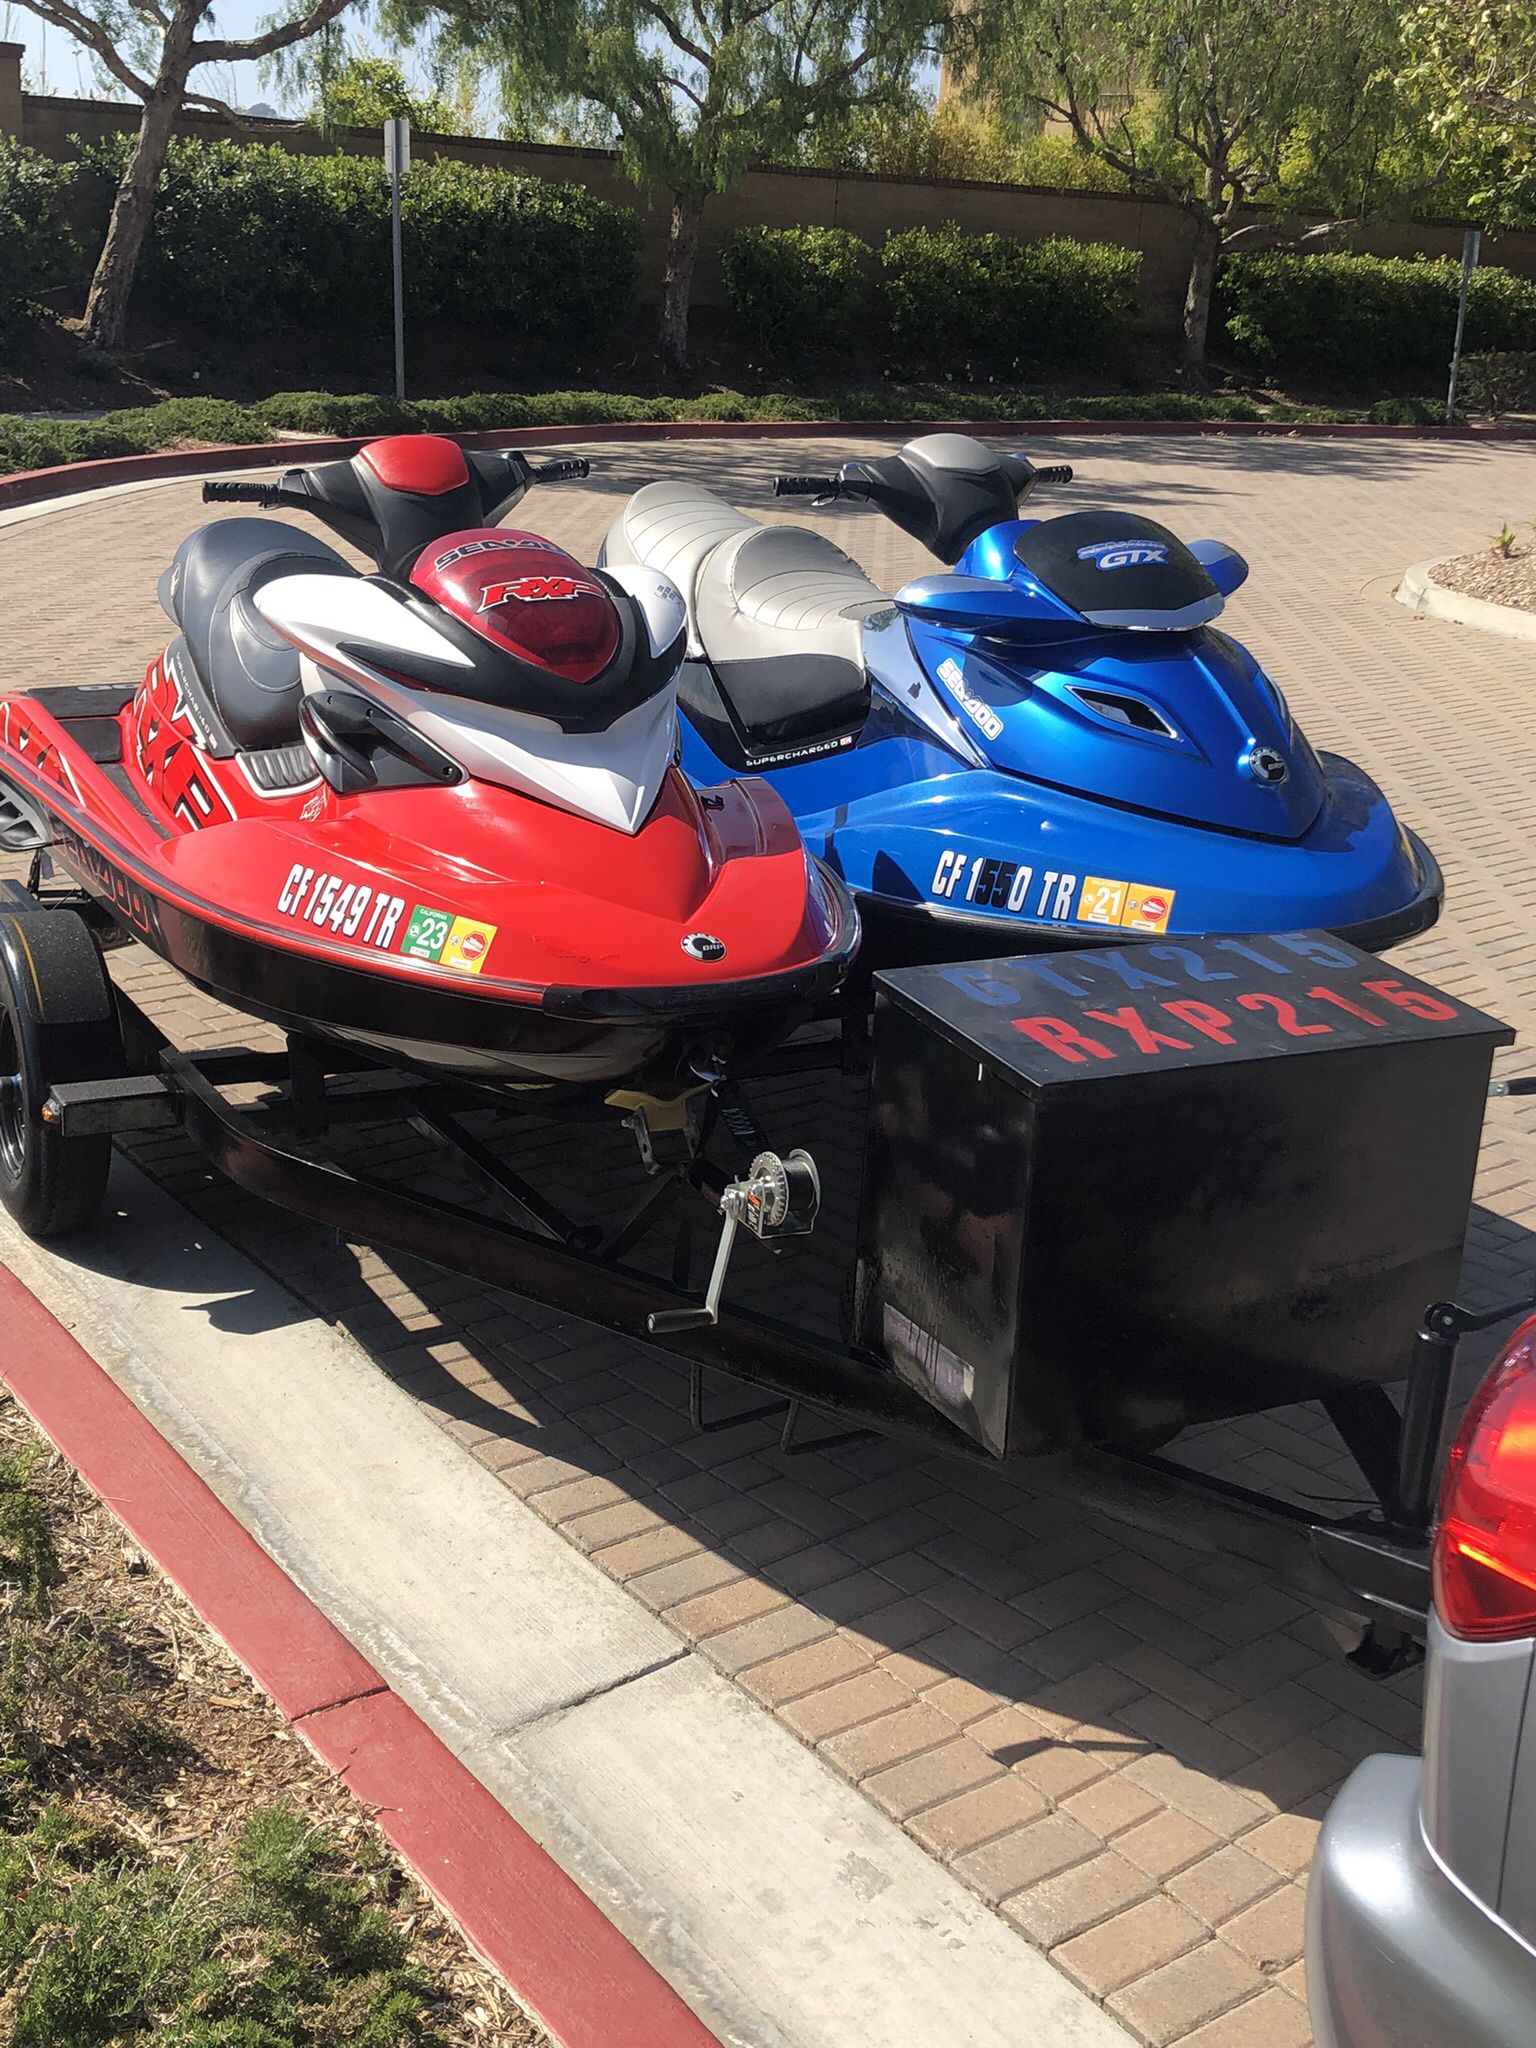 For sale 2 Jet Skis And Double trailer.  Blue Sea Doo 2007 GTX 215 Supercharged Limited edition, Red Sea Doo 2007  RXP Supercharged.  Zeiman trailer